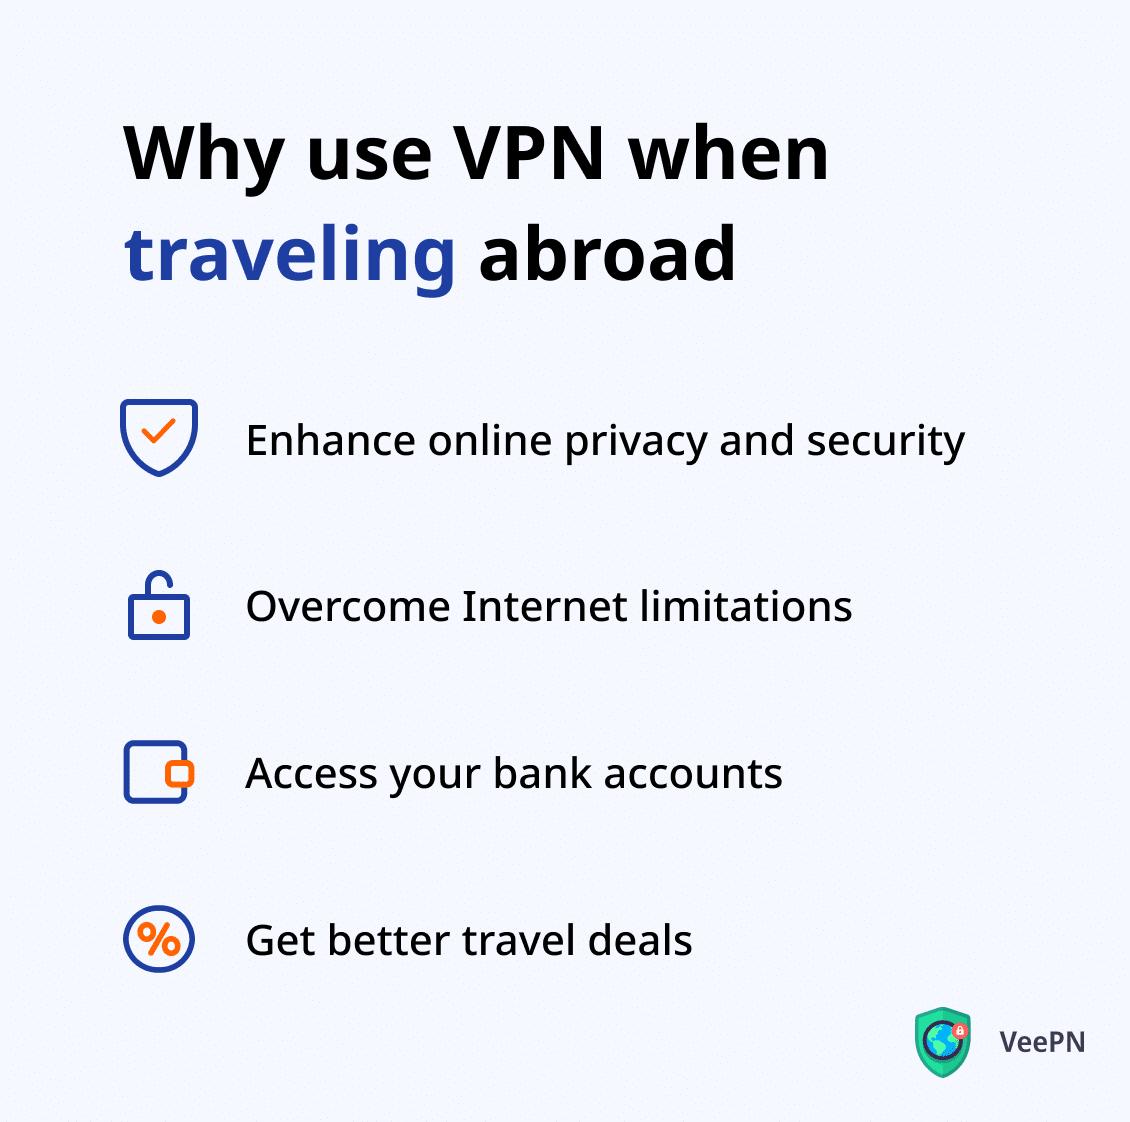 Why use VPN when traveling abroad